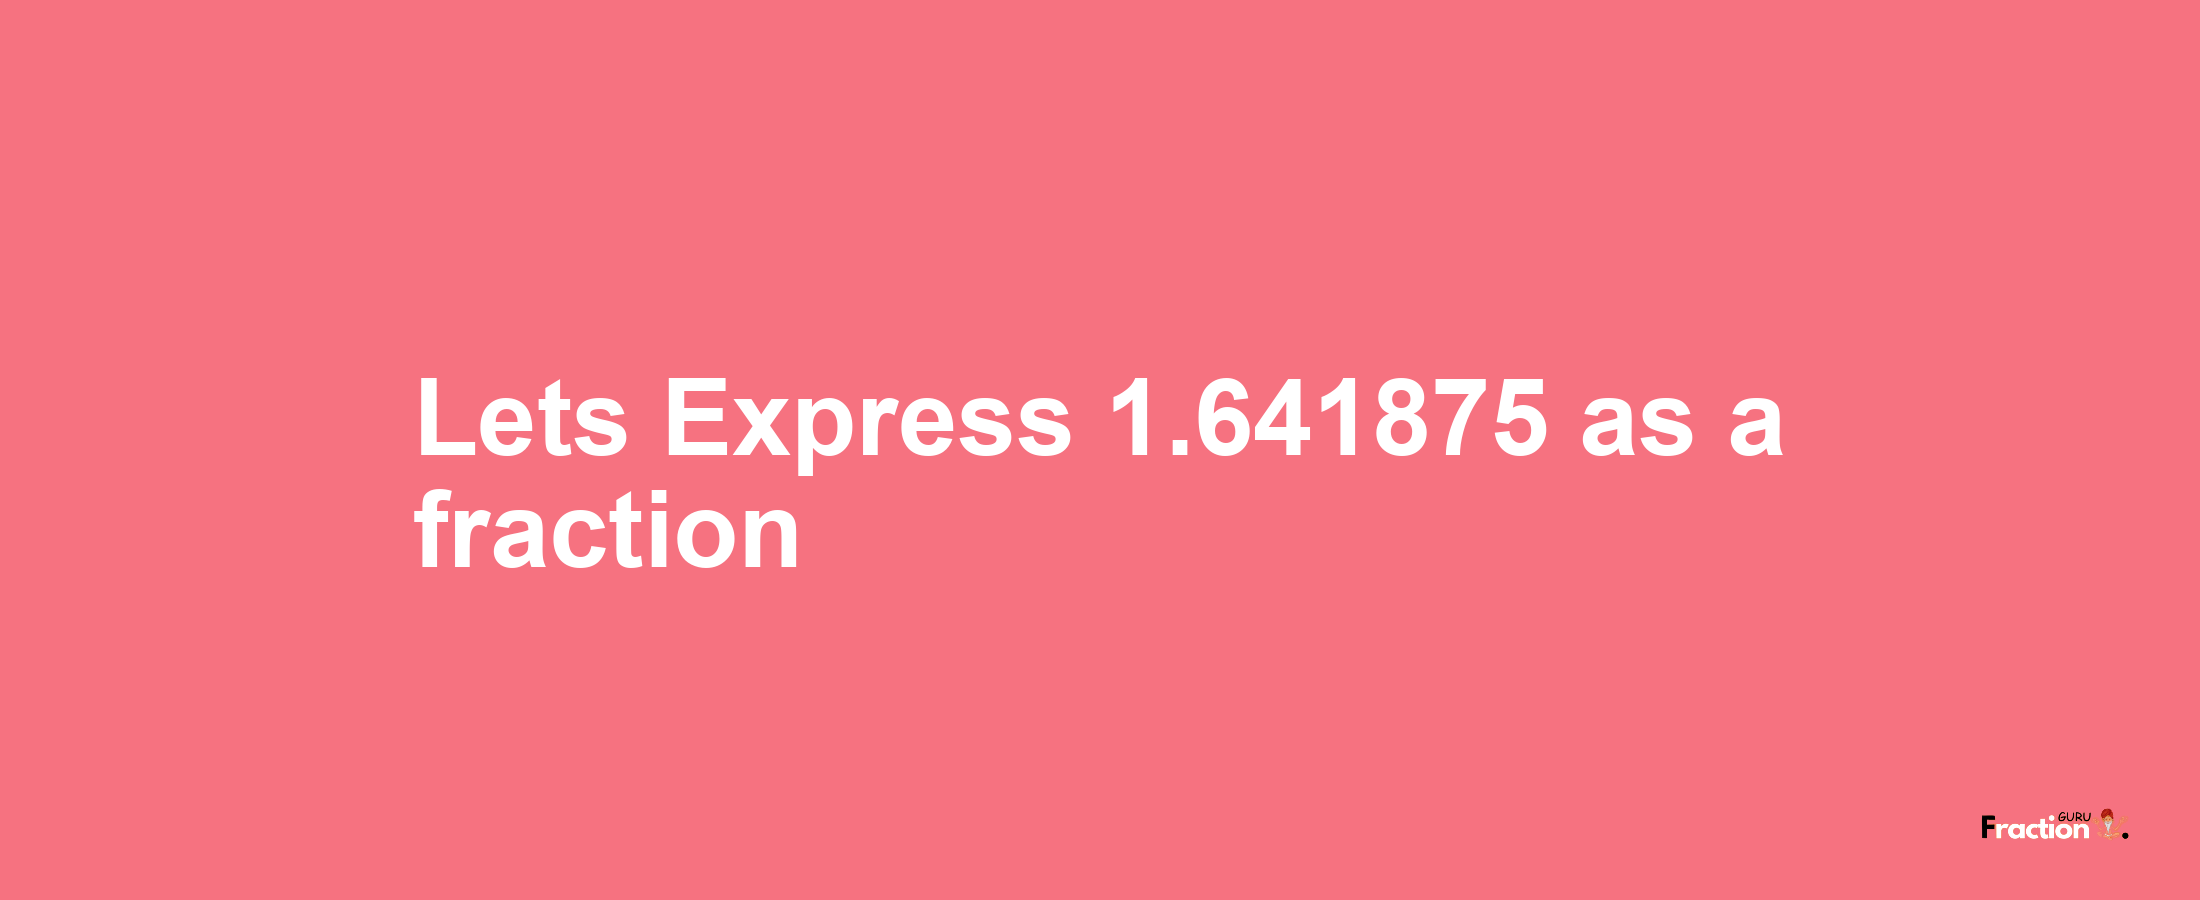 Lets Express 1.641875 as afraction